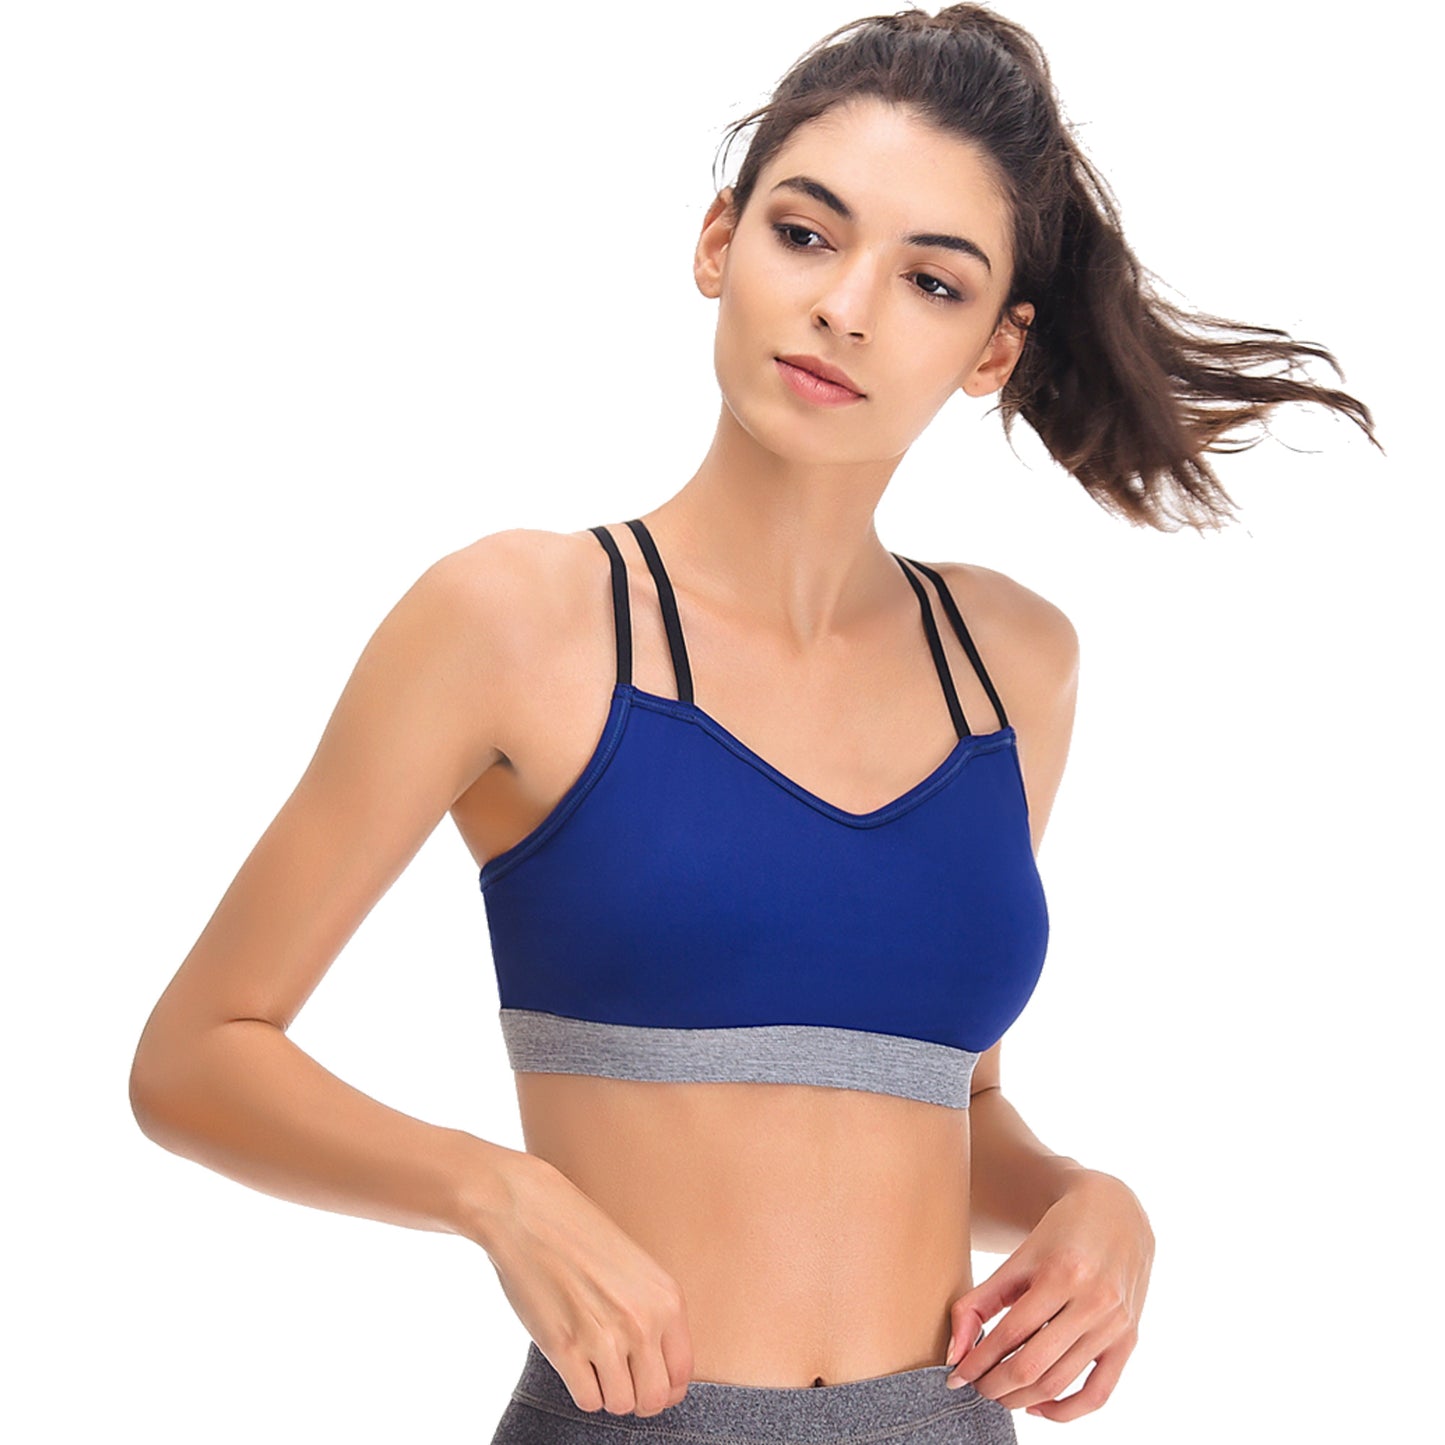 Women's Sports Bras - Padded Yoga Bra Medium Support Workout Activewear Workout Clothes